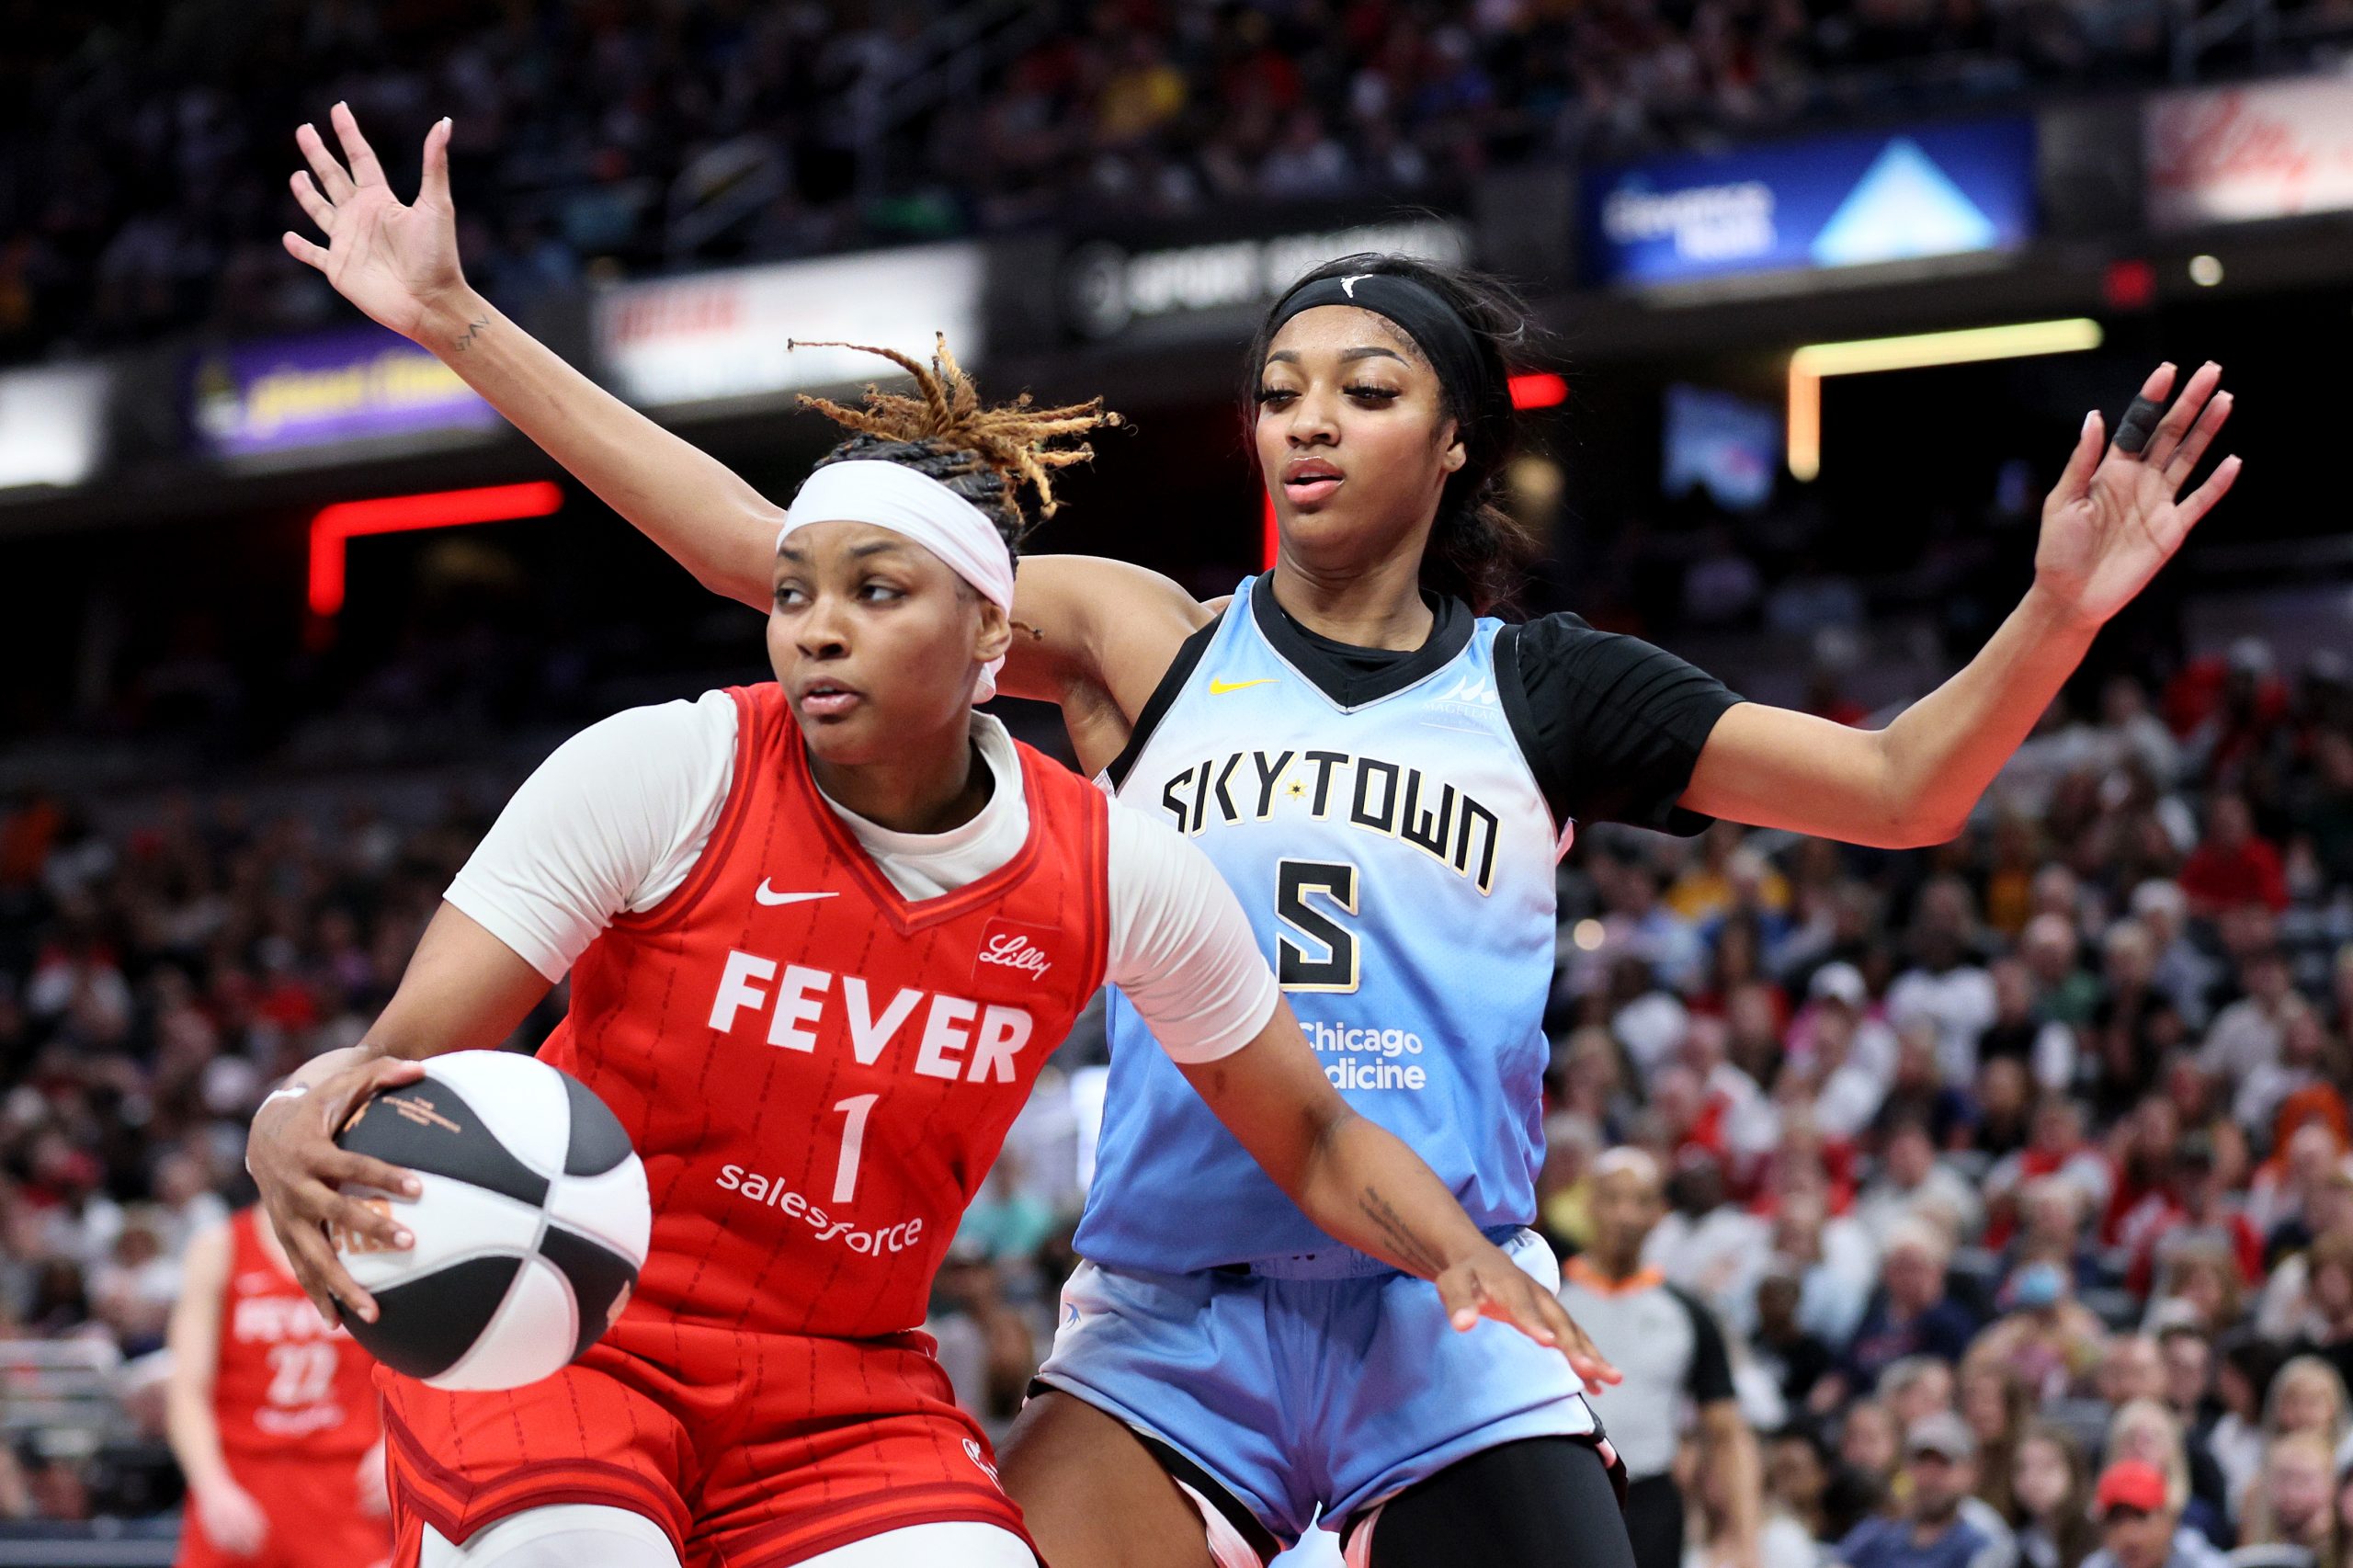 Angel Reese fined by WNBA for skipping out on media after loss